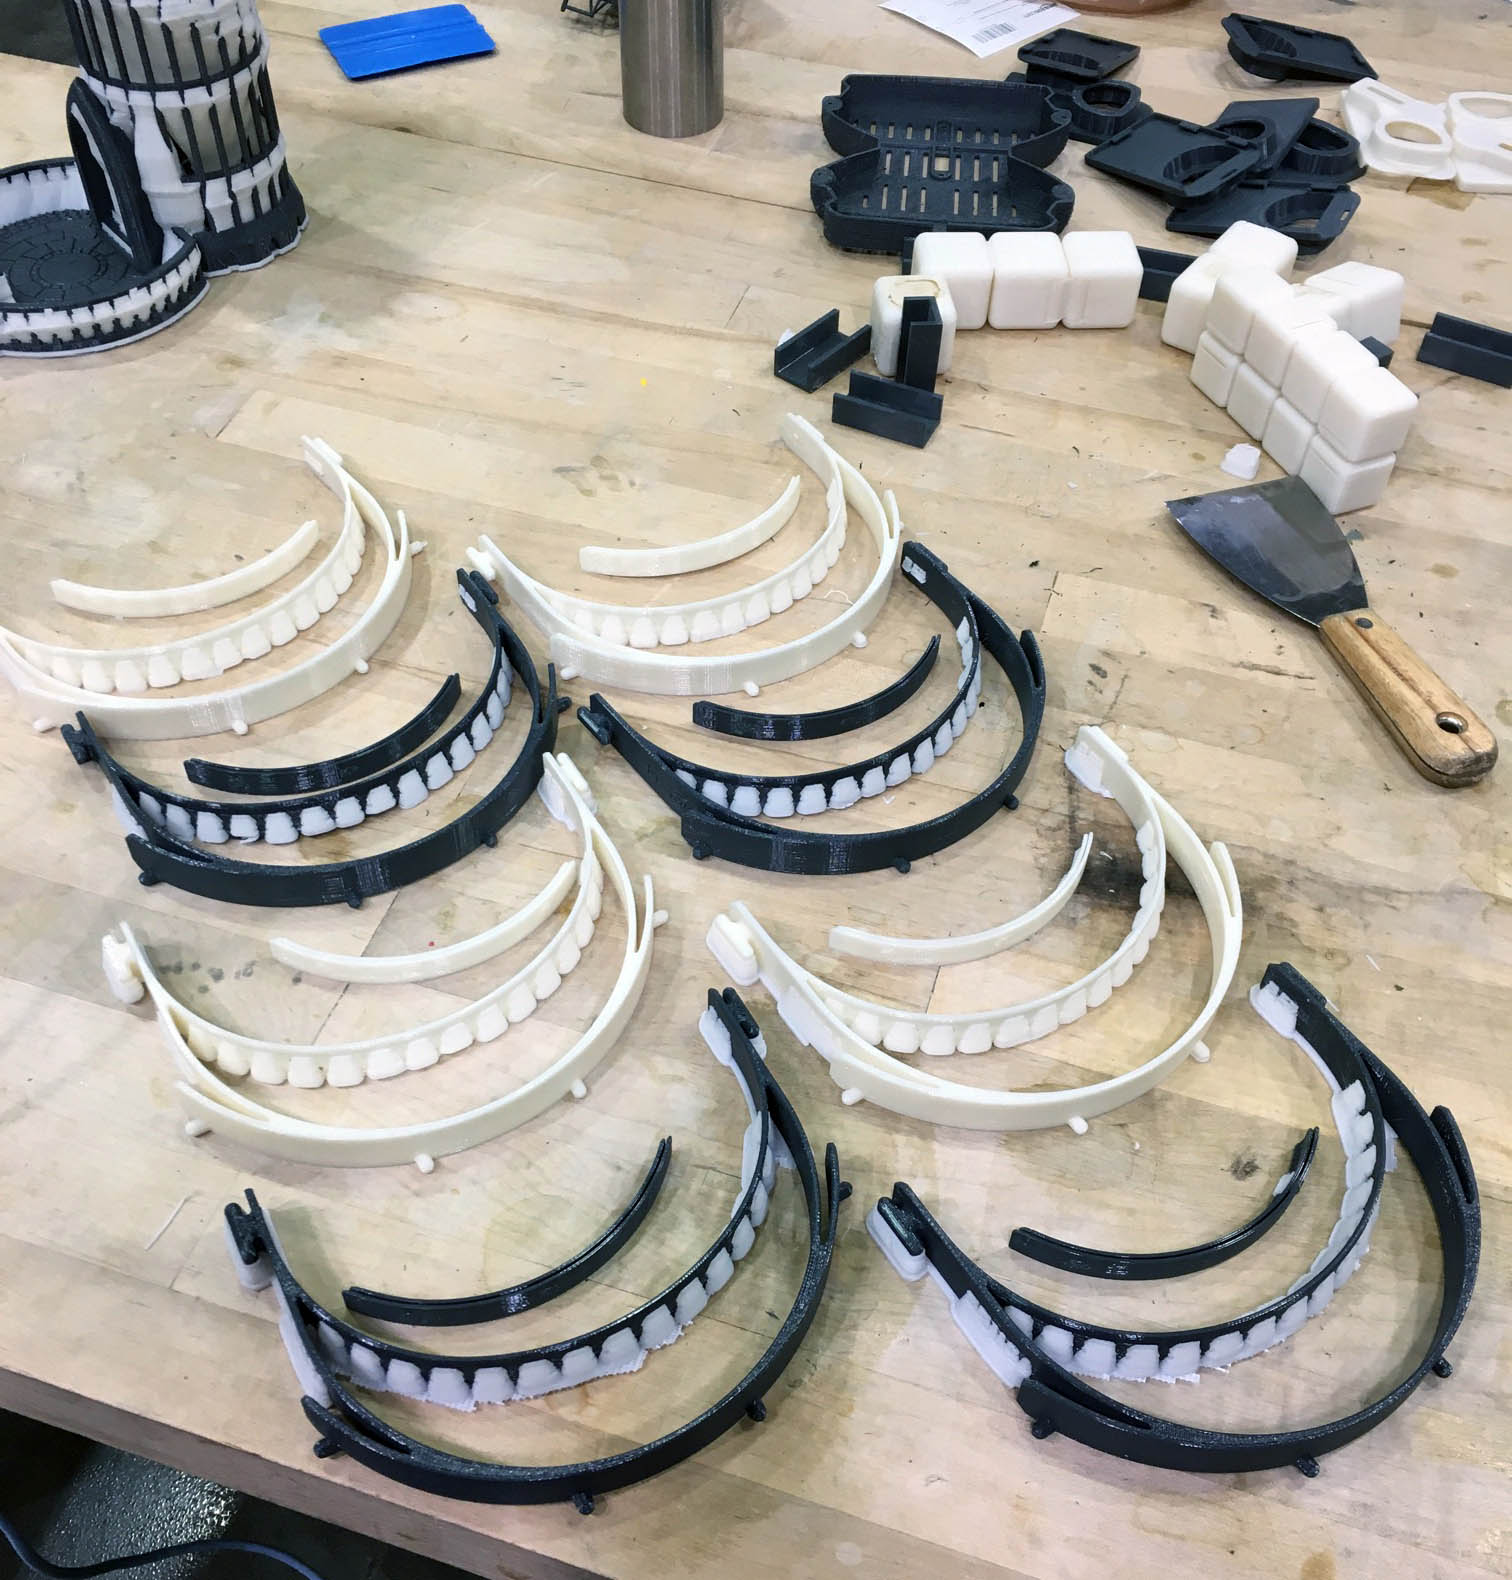 Face-shield headpieces 3D-printed at APL's maker space